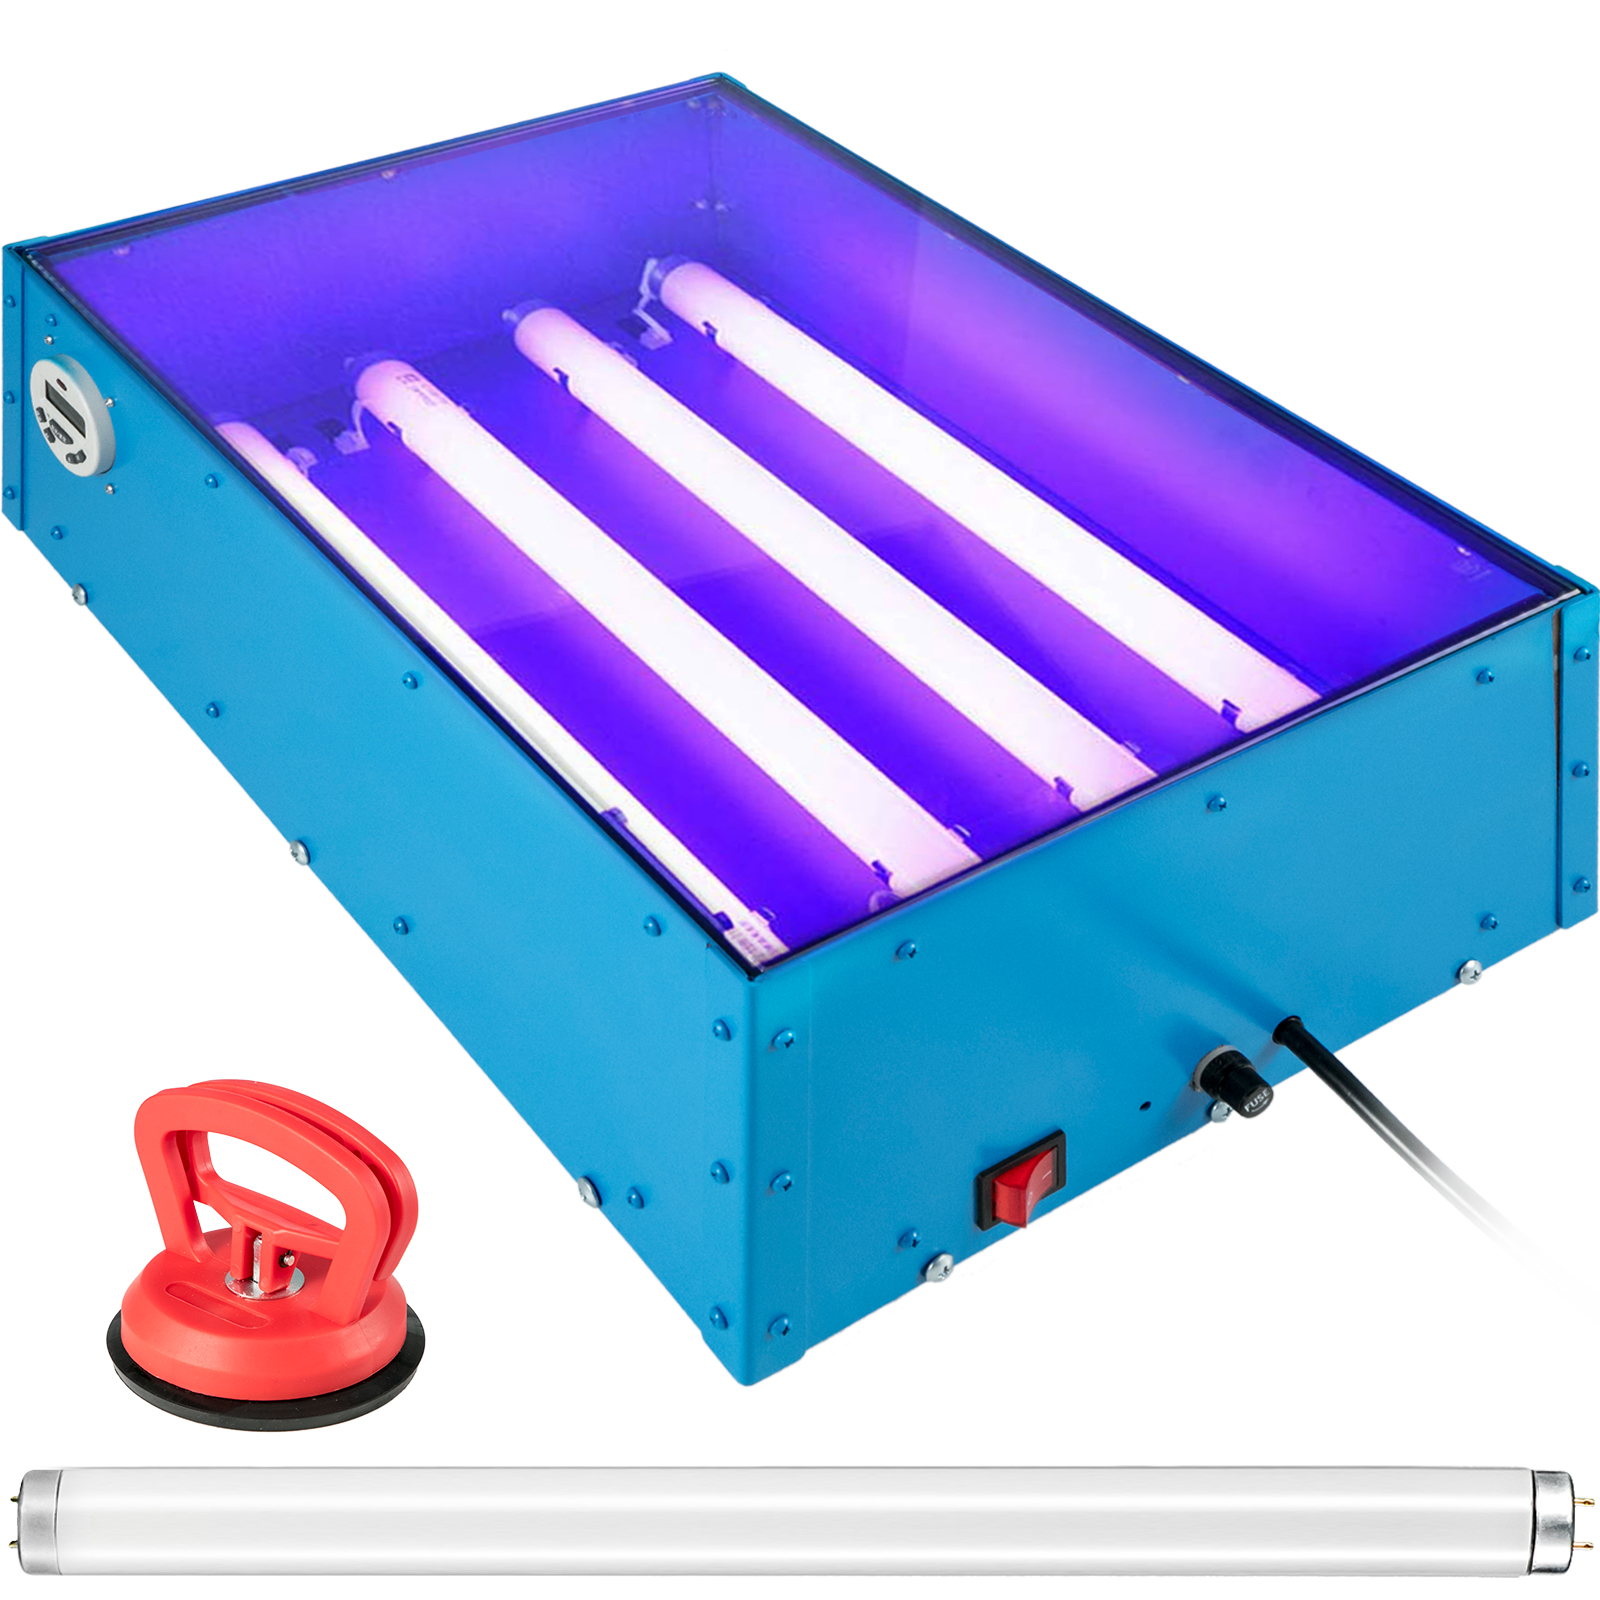 Details about   Screen Printing Machine Exposure Unit Silk Screen LED Light Plate Maker 18"x12" 